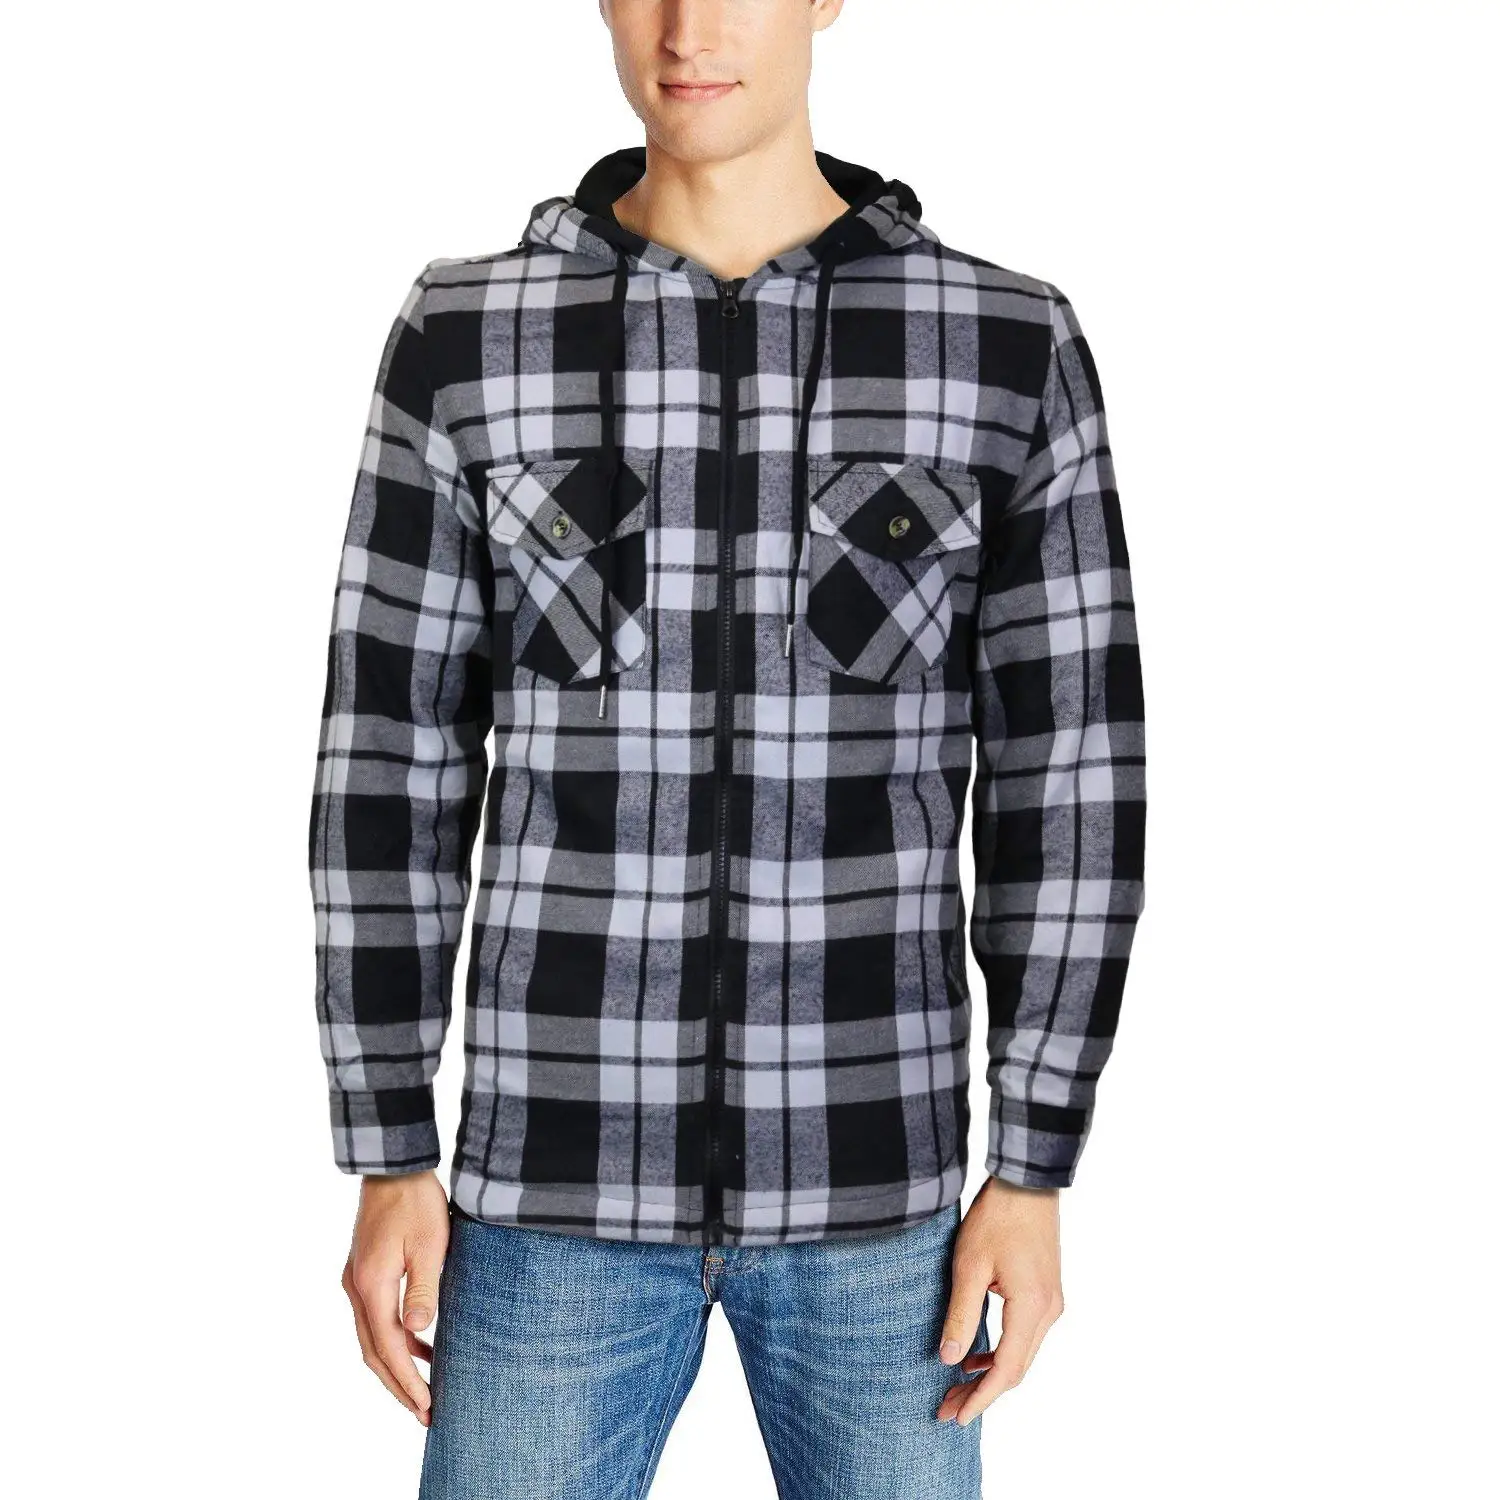 Cheap Checkered Hoodie, find Checkered Hoodie deals on line at Alibaba.com